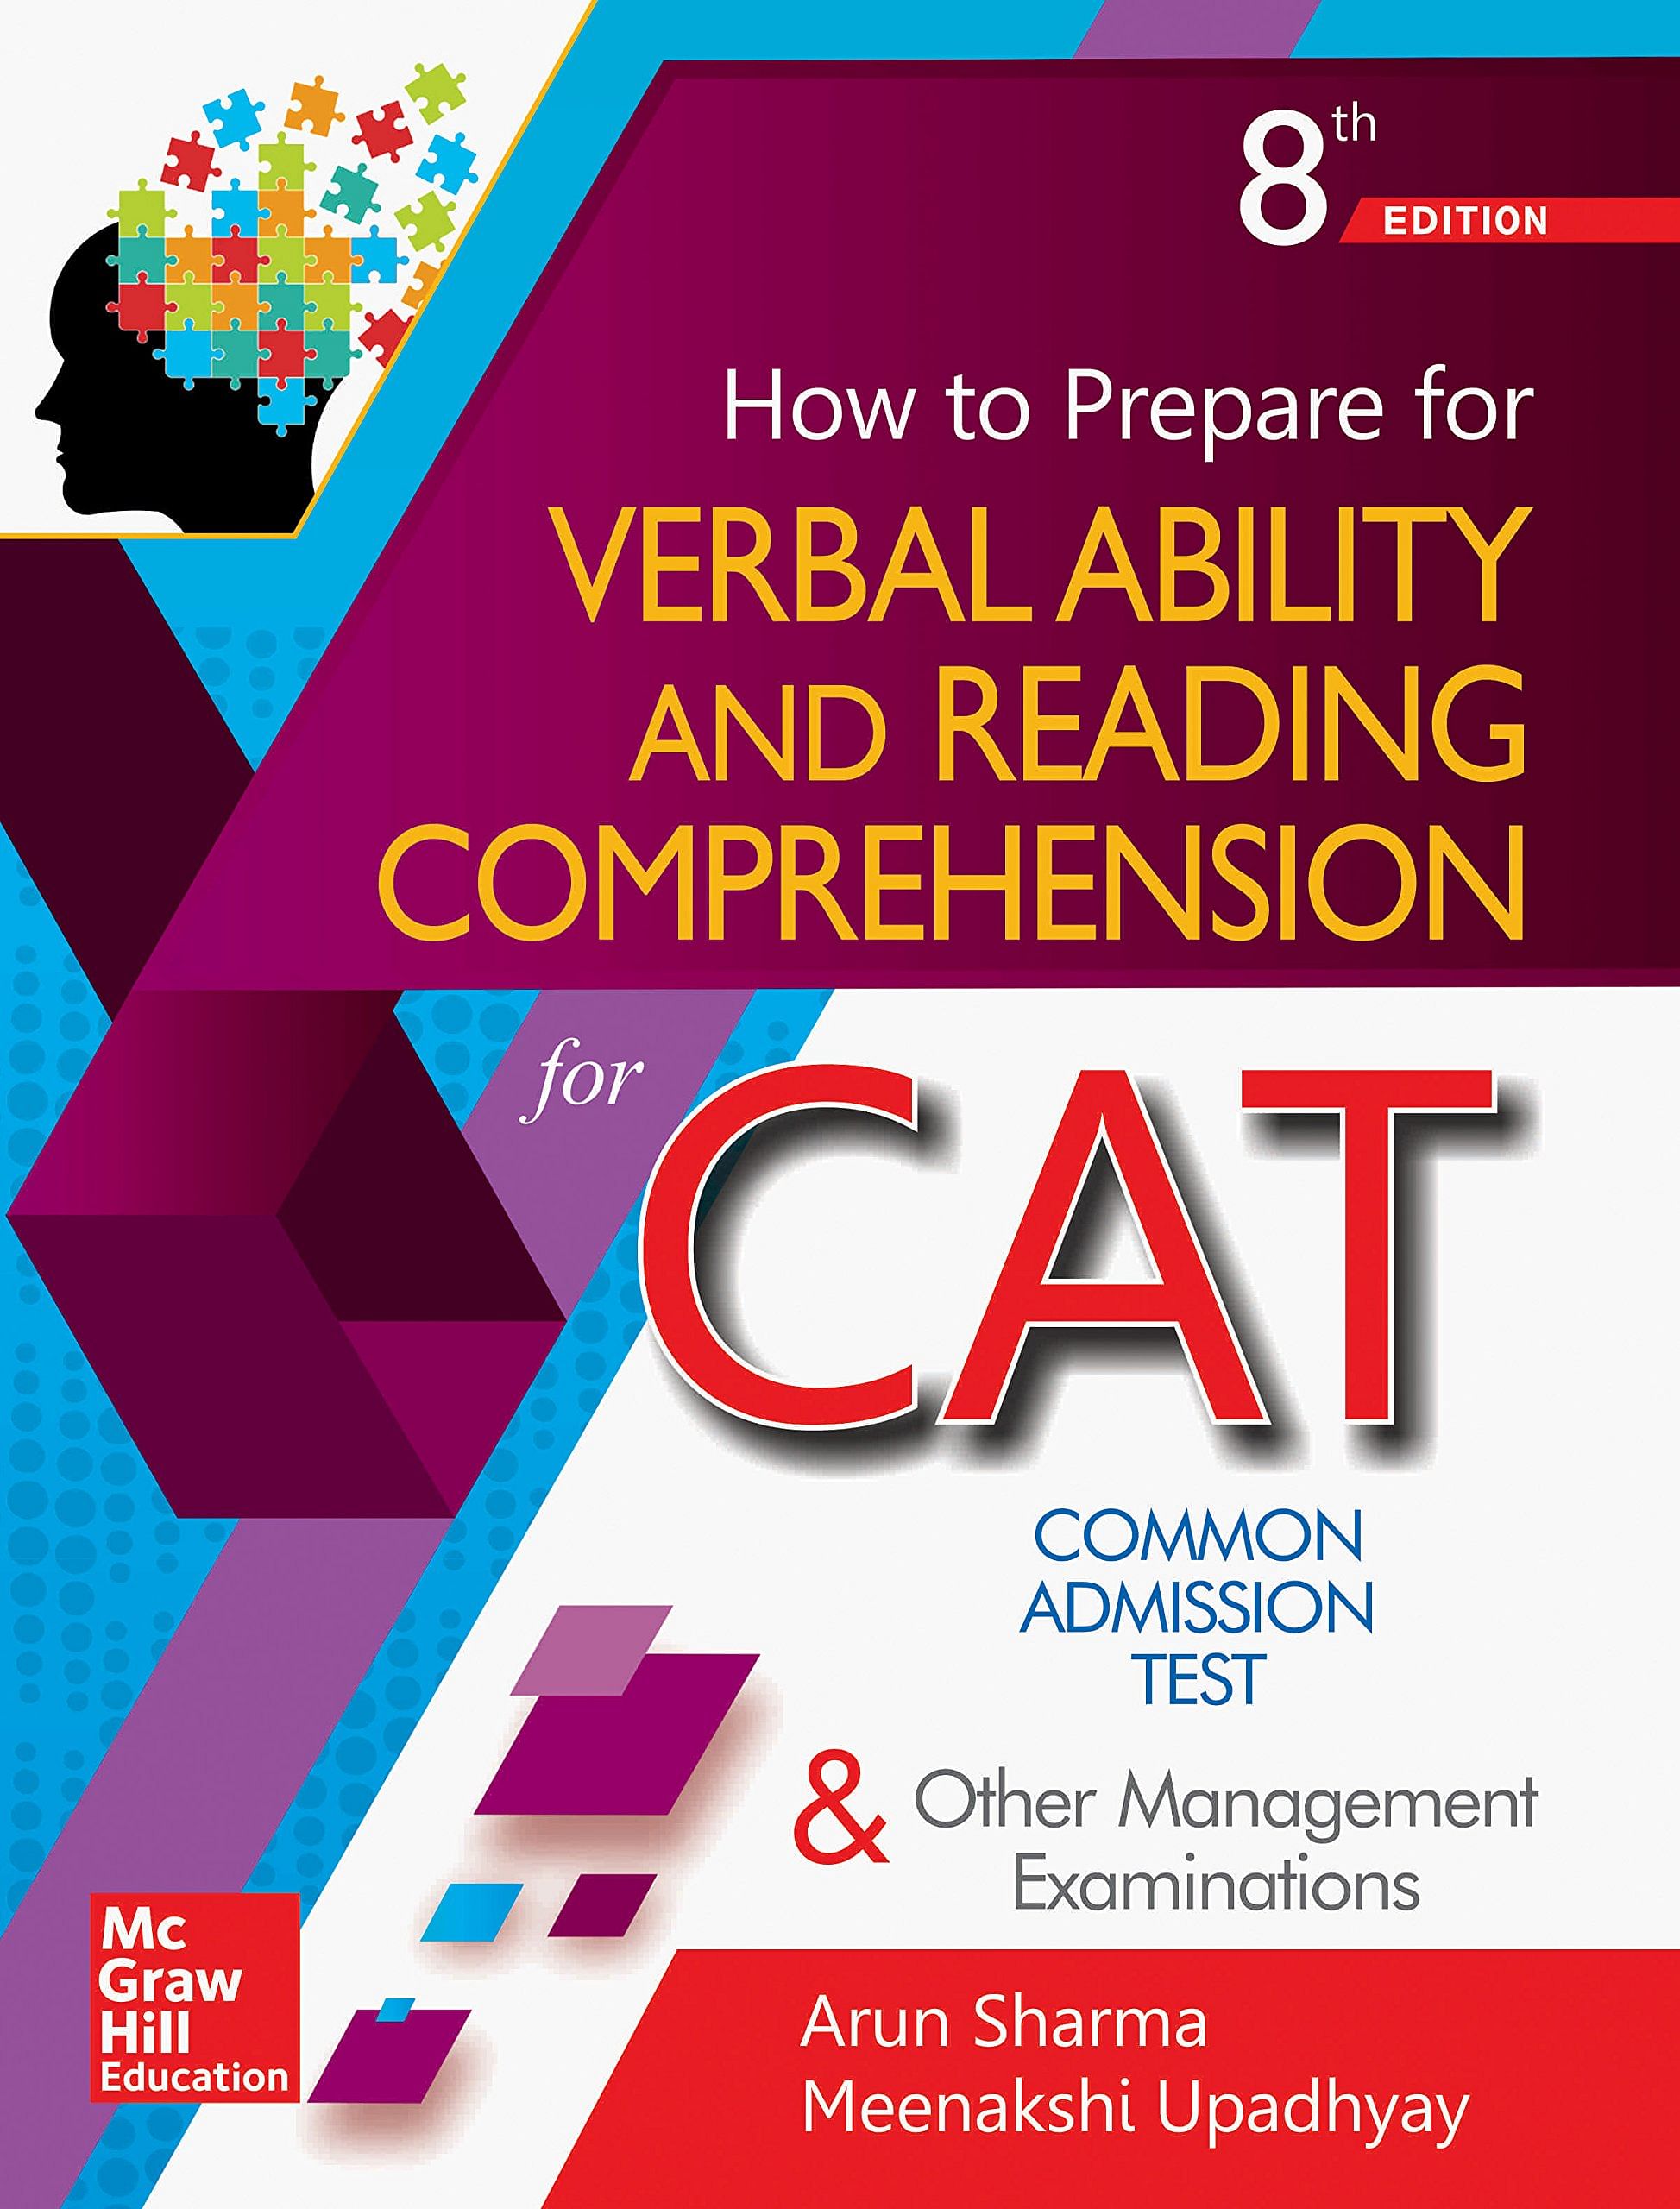 XAT- VERBAL and RC